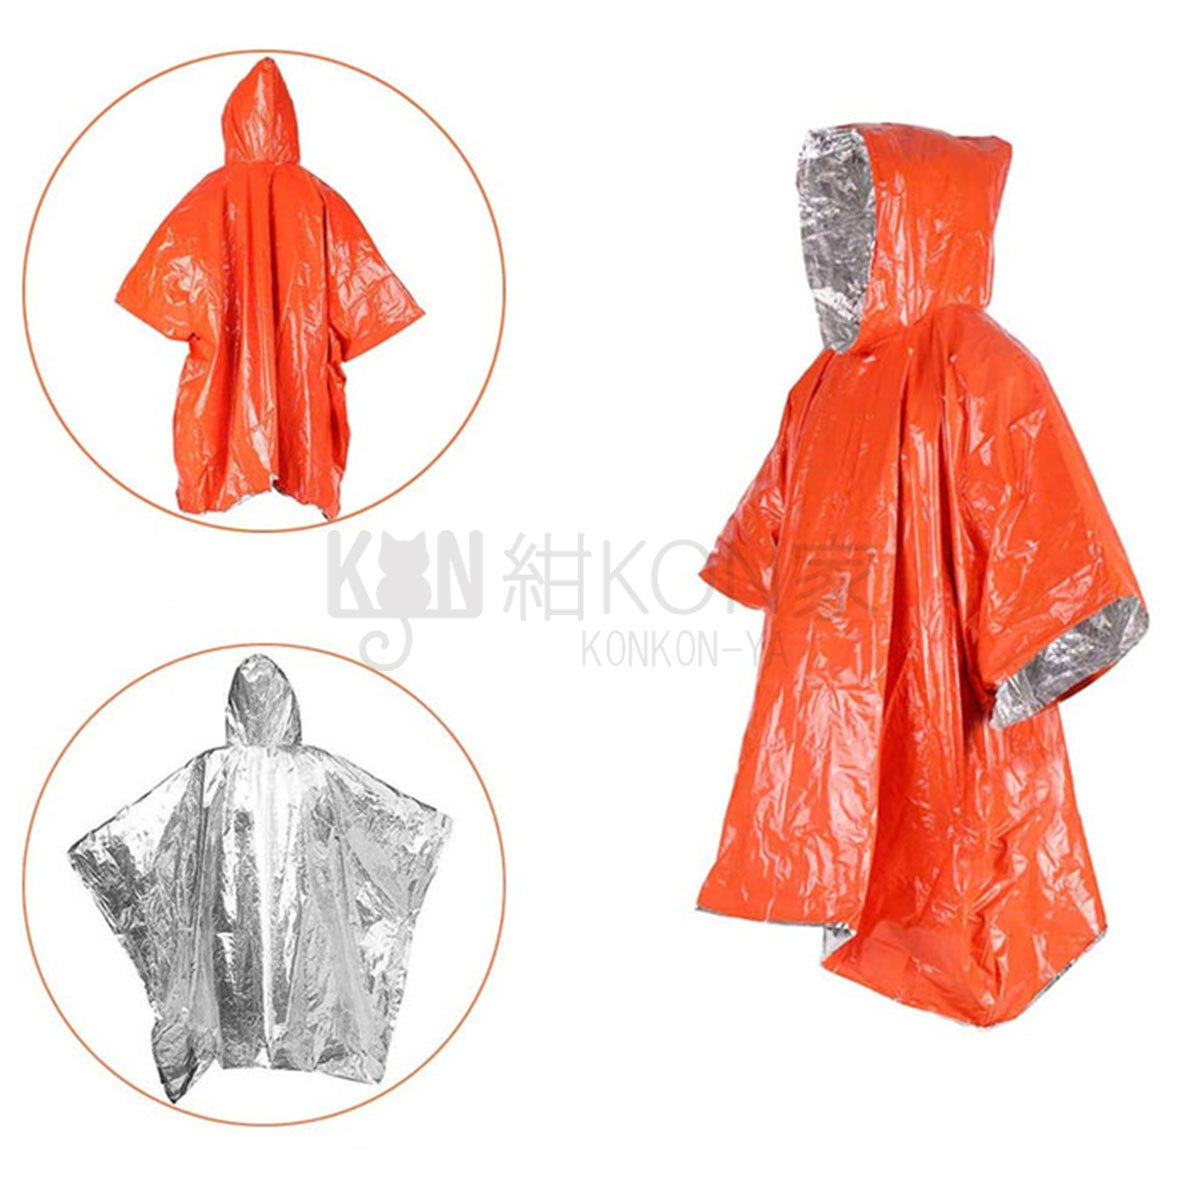  aluminium poncho aluminium seat disaster prevention goods emergency compact light weight disaster prevention for emergency urgent for cold . measures Survival rain storage pouch attaching Point ..